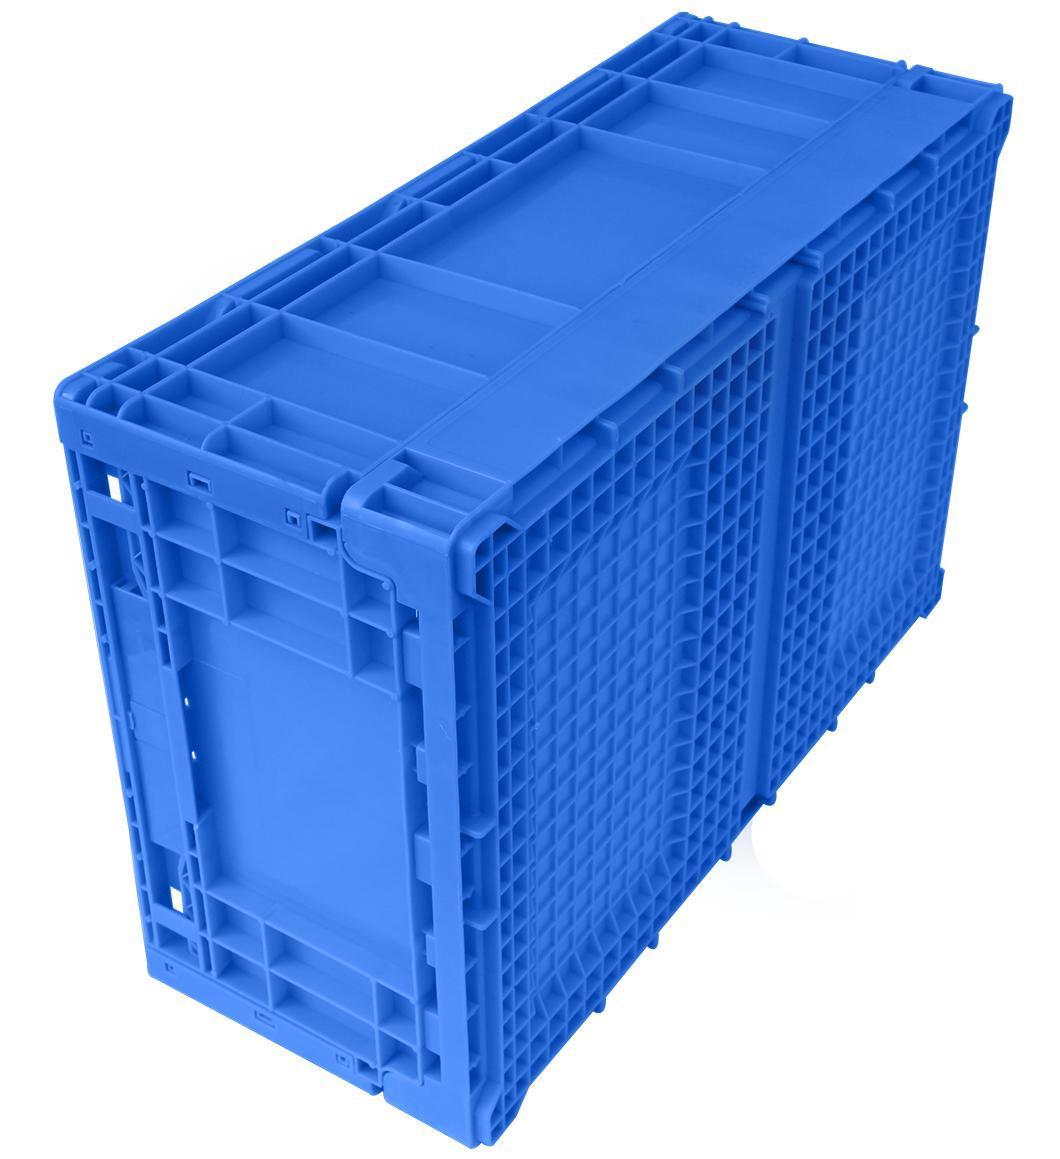 S806A S Folding Containers Adjustable Plastic Storage Box, Foldable Storage Box, Hard Plastic Collapsible Storage Box